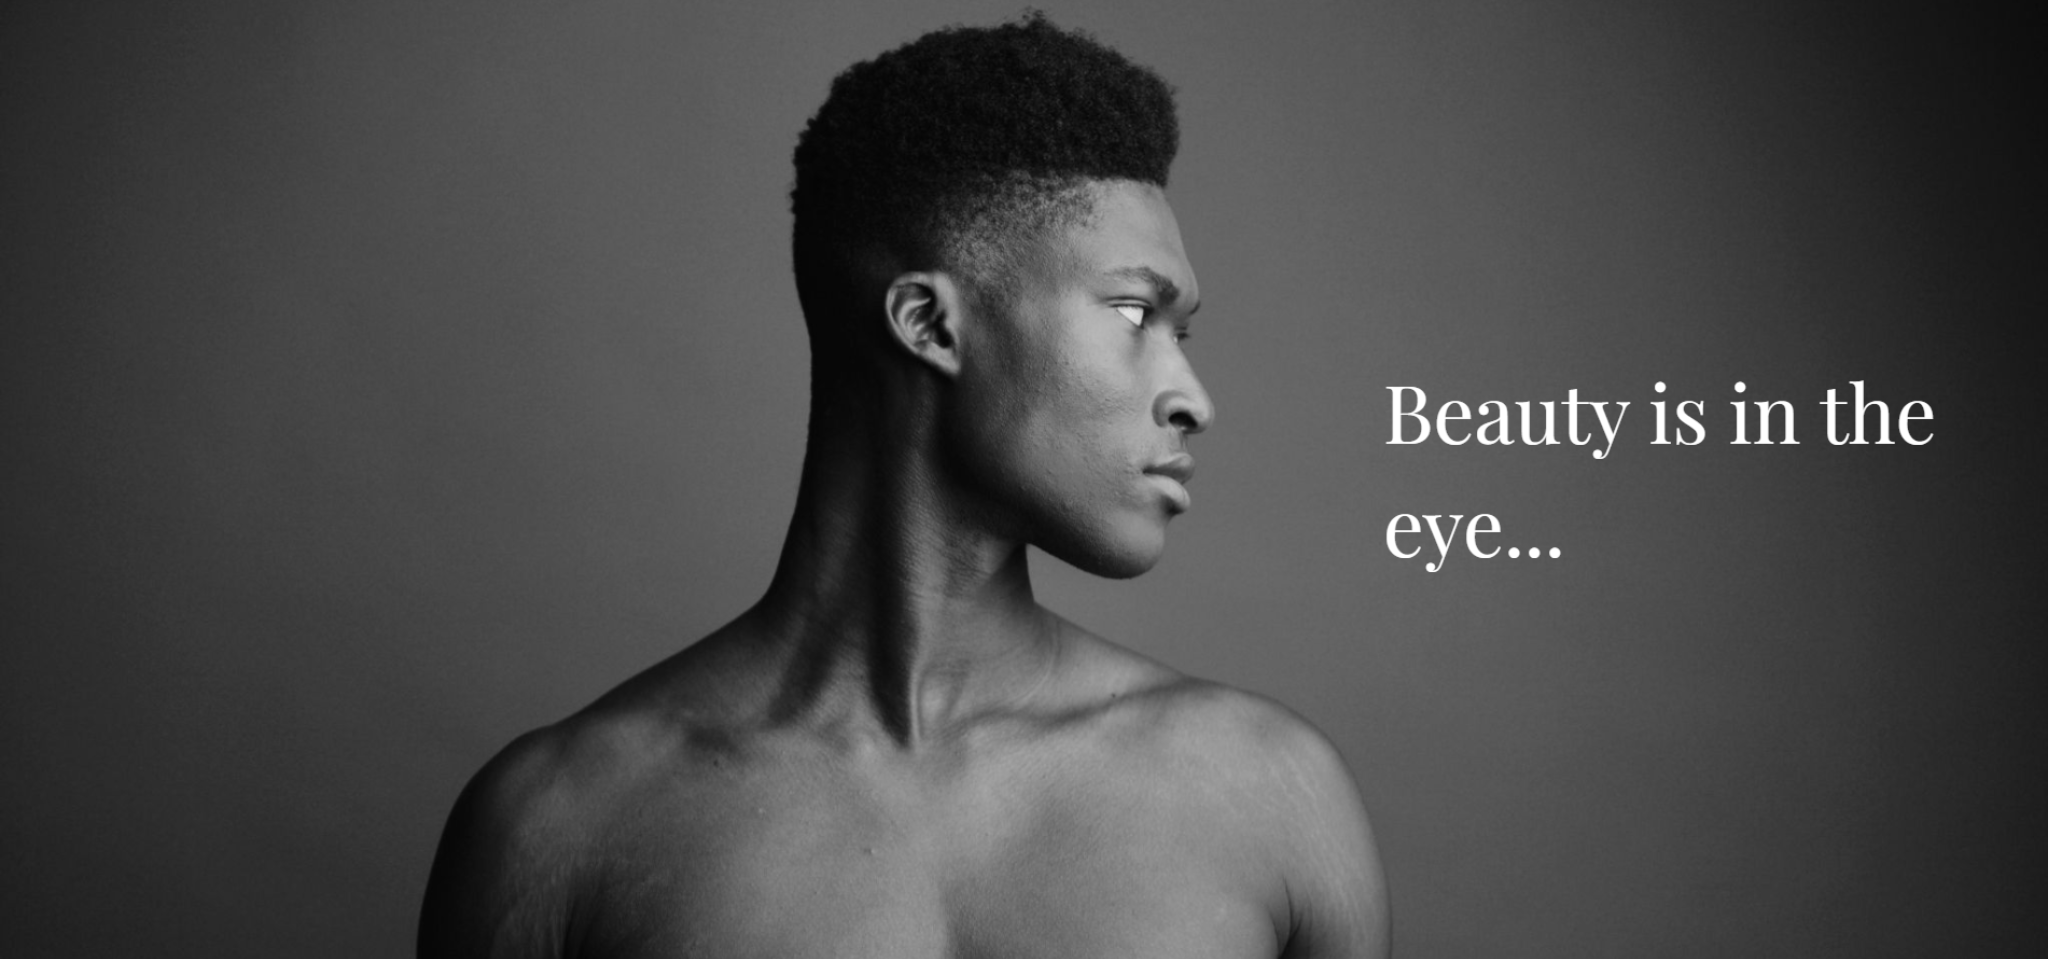 IU C&I Studios Portfolio and Page Beauty Featured Image Black and white headshot of bare chested male model looking off to the side with white Beauty is in the eye text